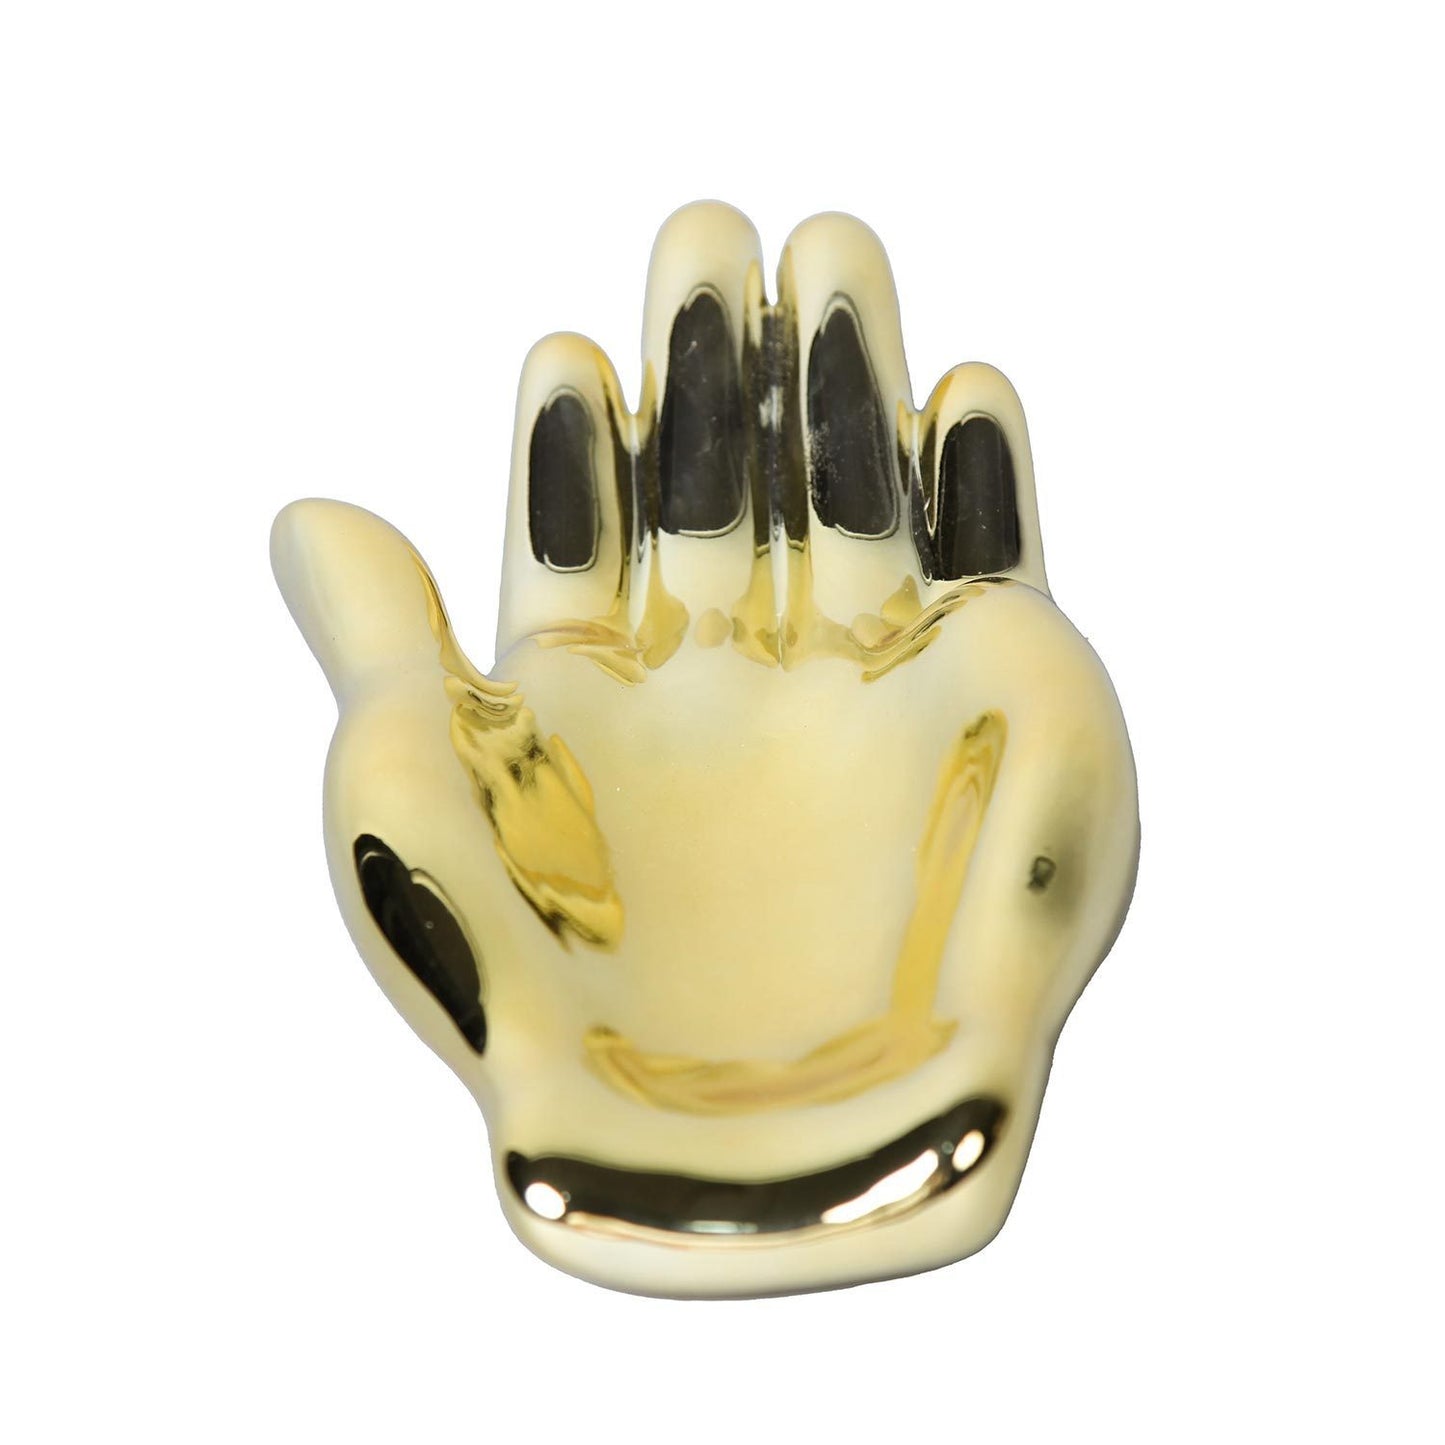 Ceramic Hand Sculpture in Gold - Functional and Decorative Piece for Your Home